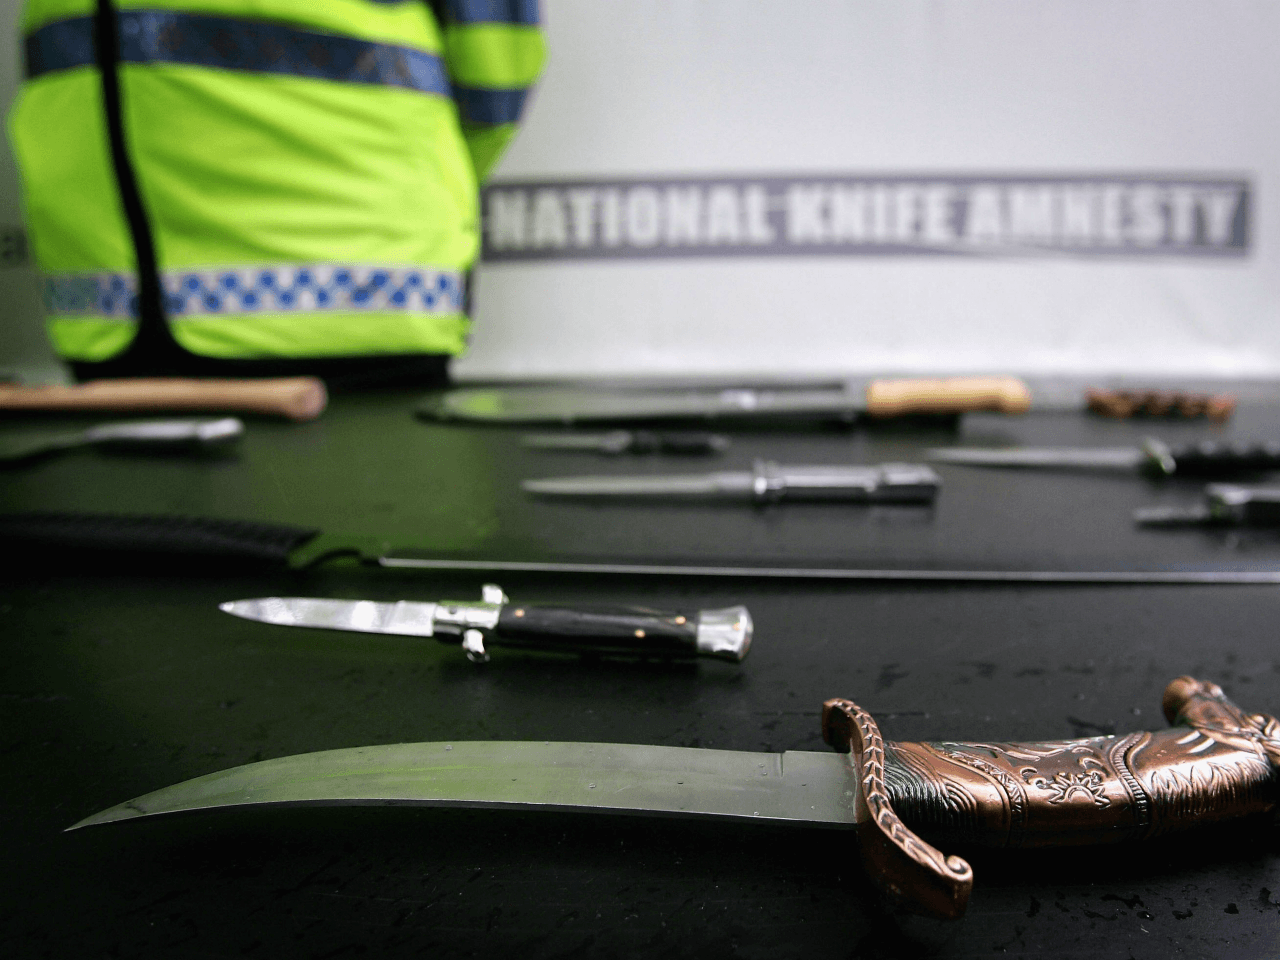 Uk Knifes confiscated Tweet. Knifes in London.